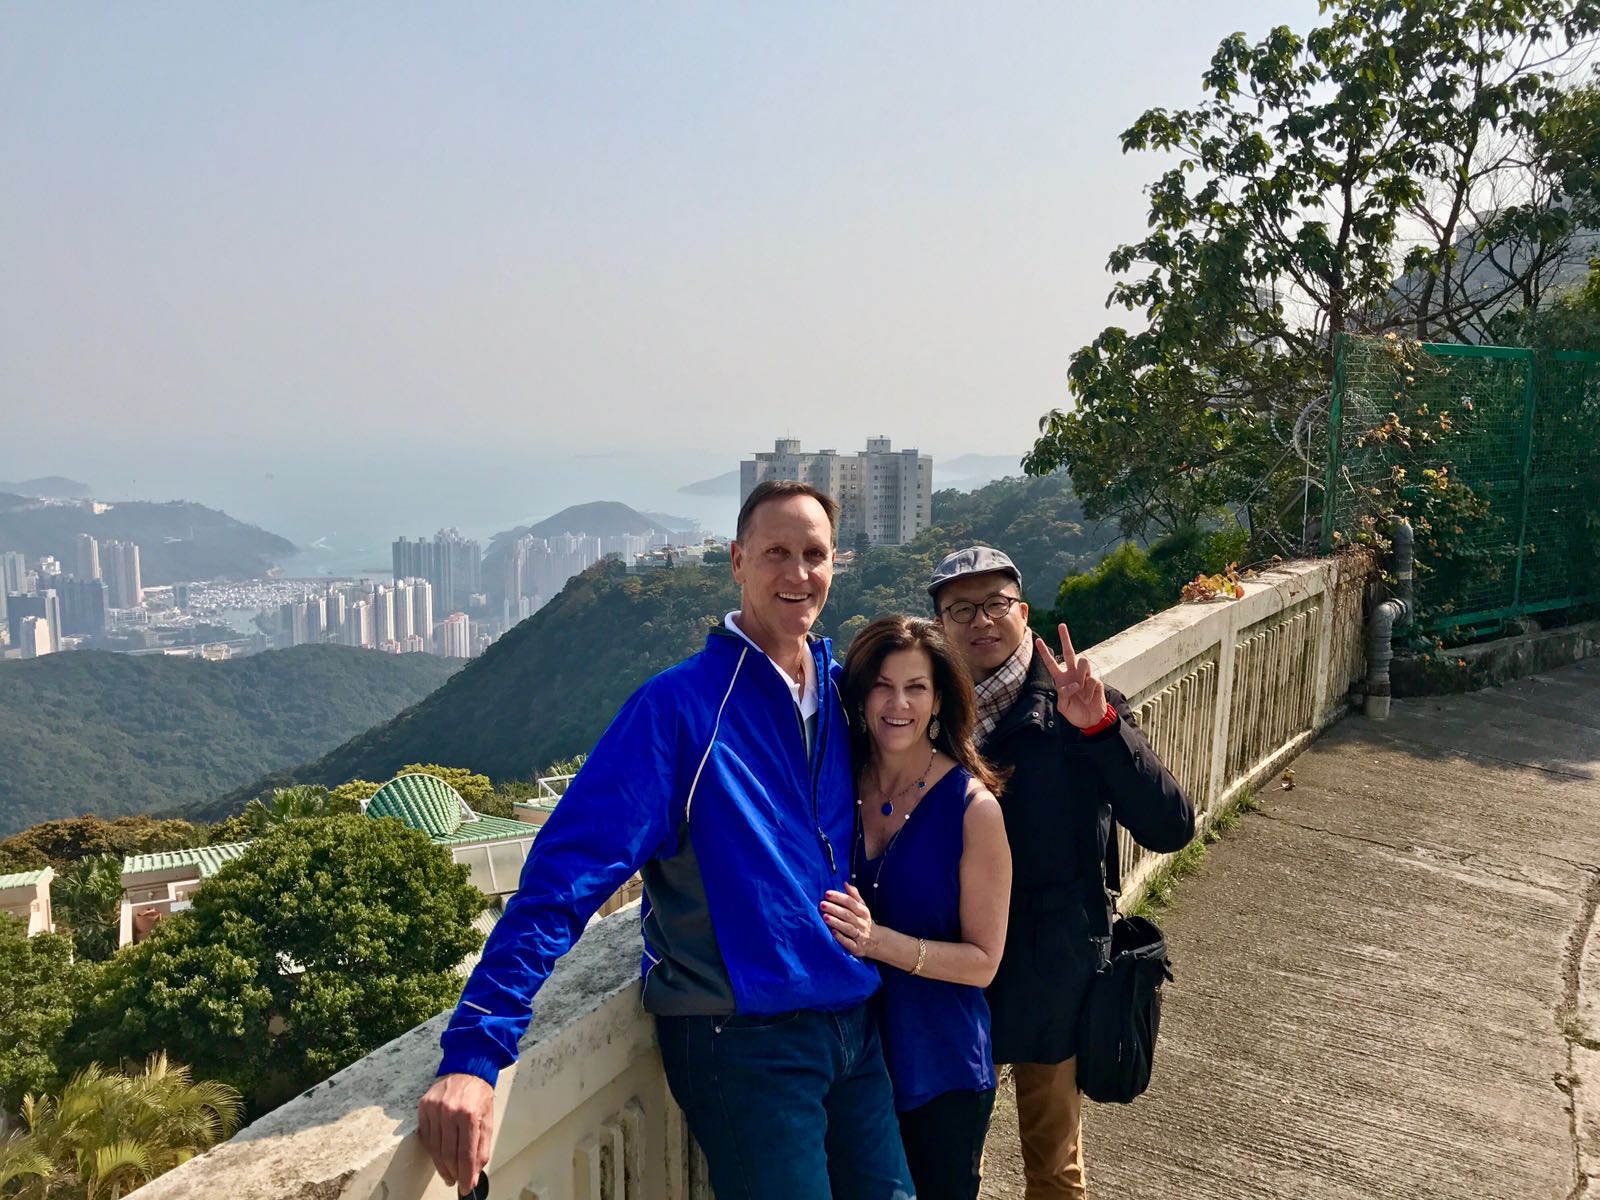 Frank the tour guide with Mr and Mrs Lautmann at Mount Kellett Road Victoria Peak